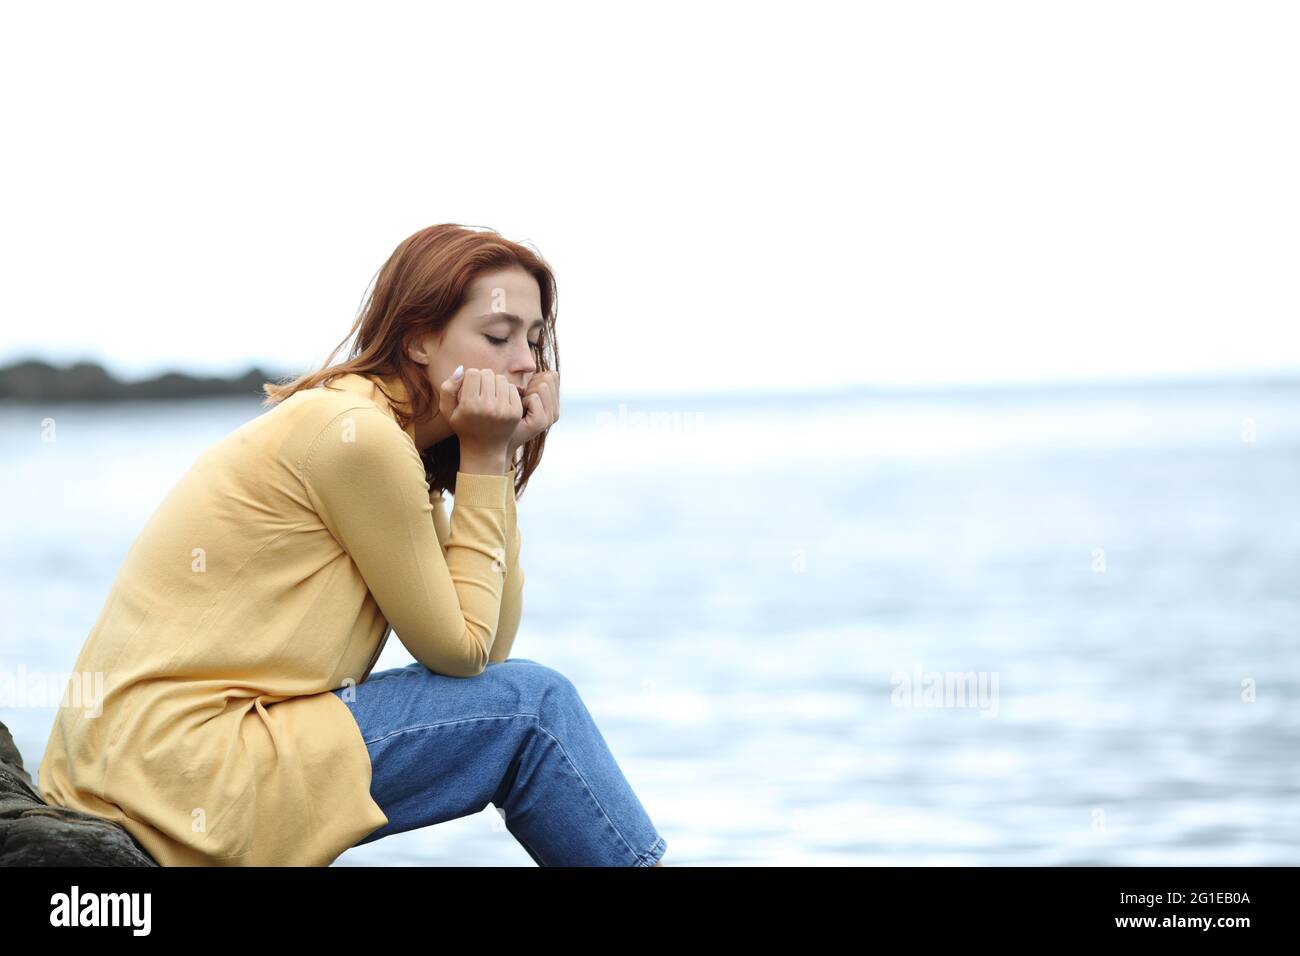 Unhappy Girl Feeling Sad On The Beach Stock Photo, Picture and